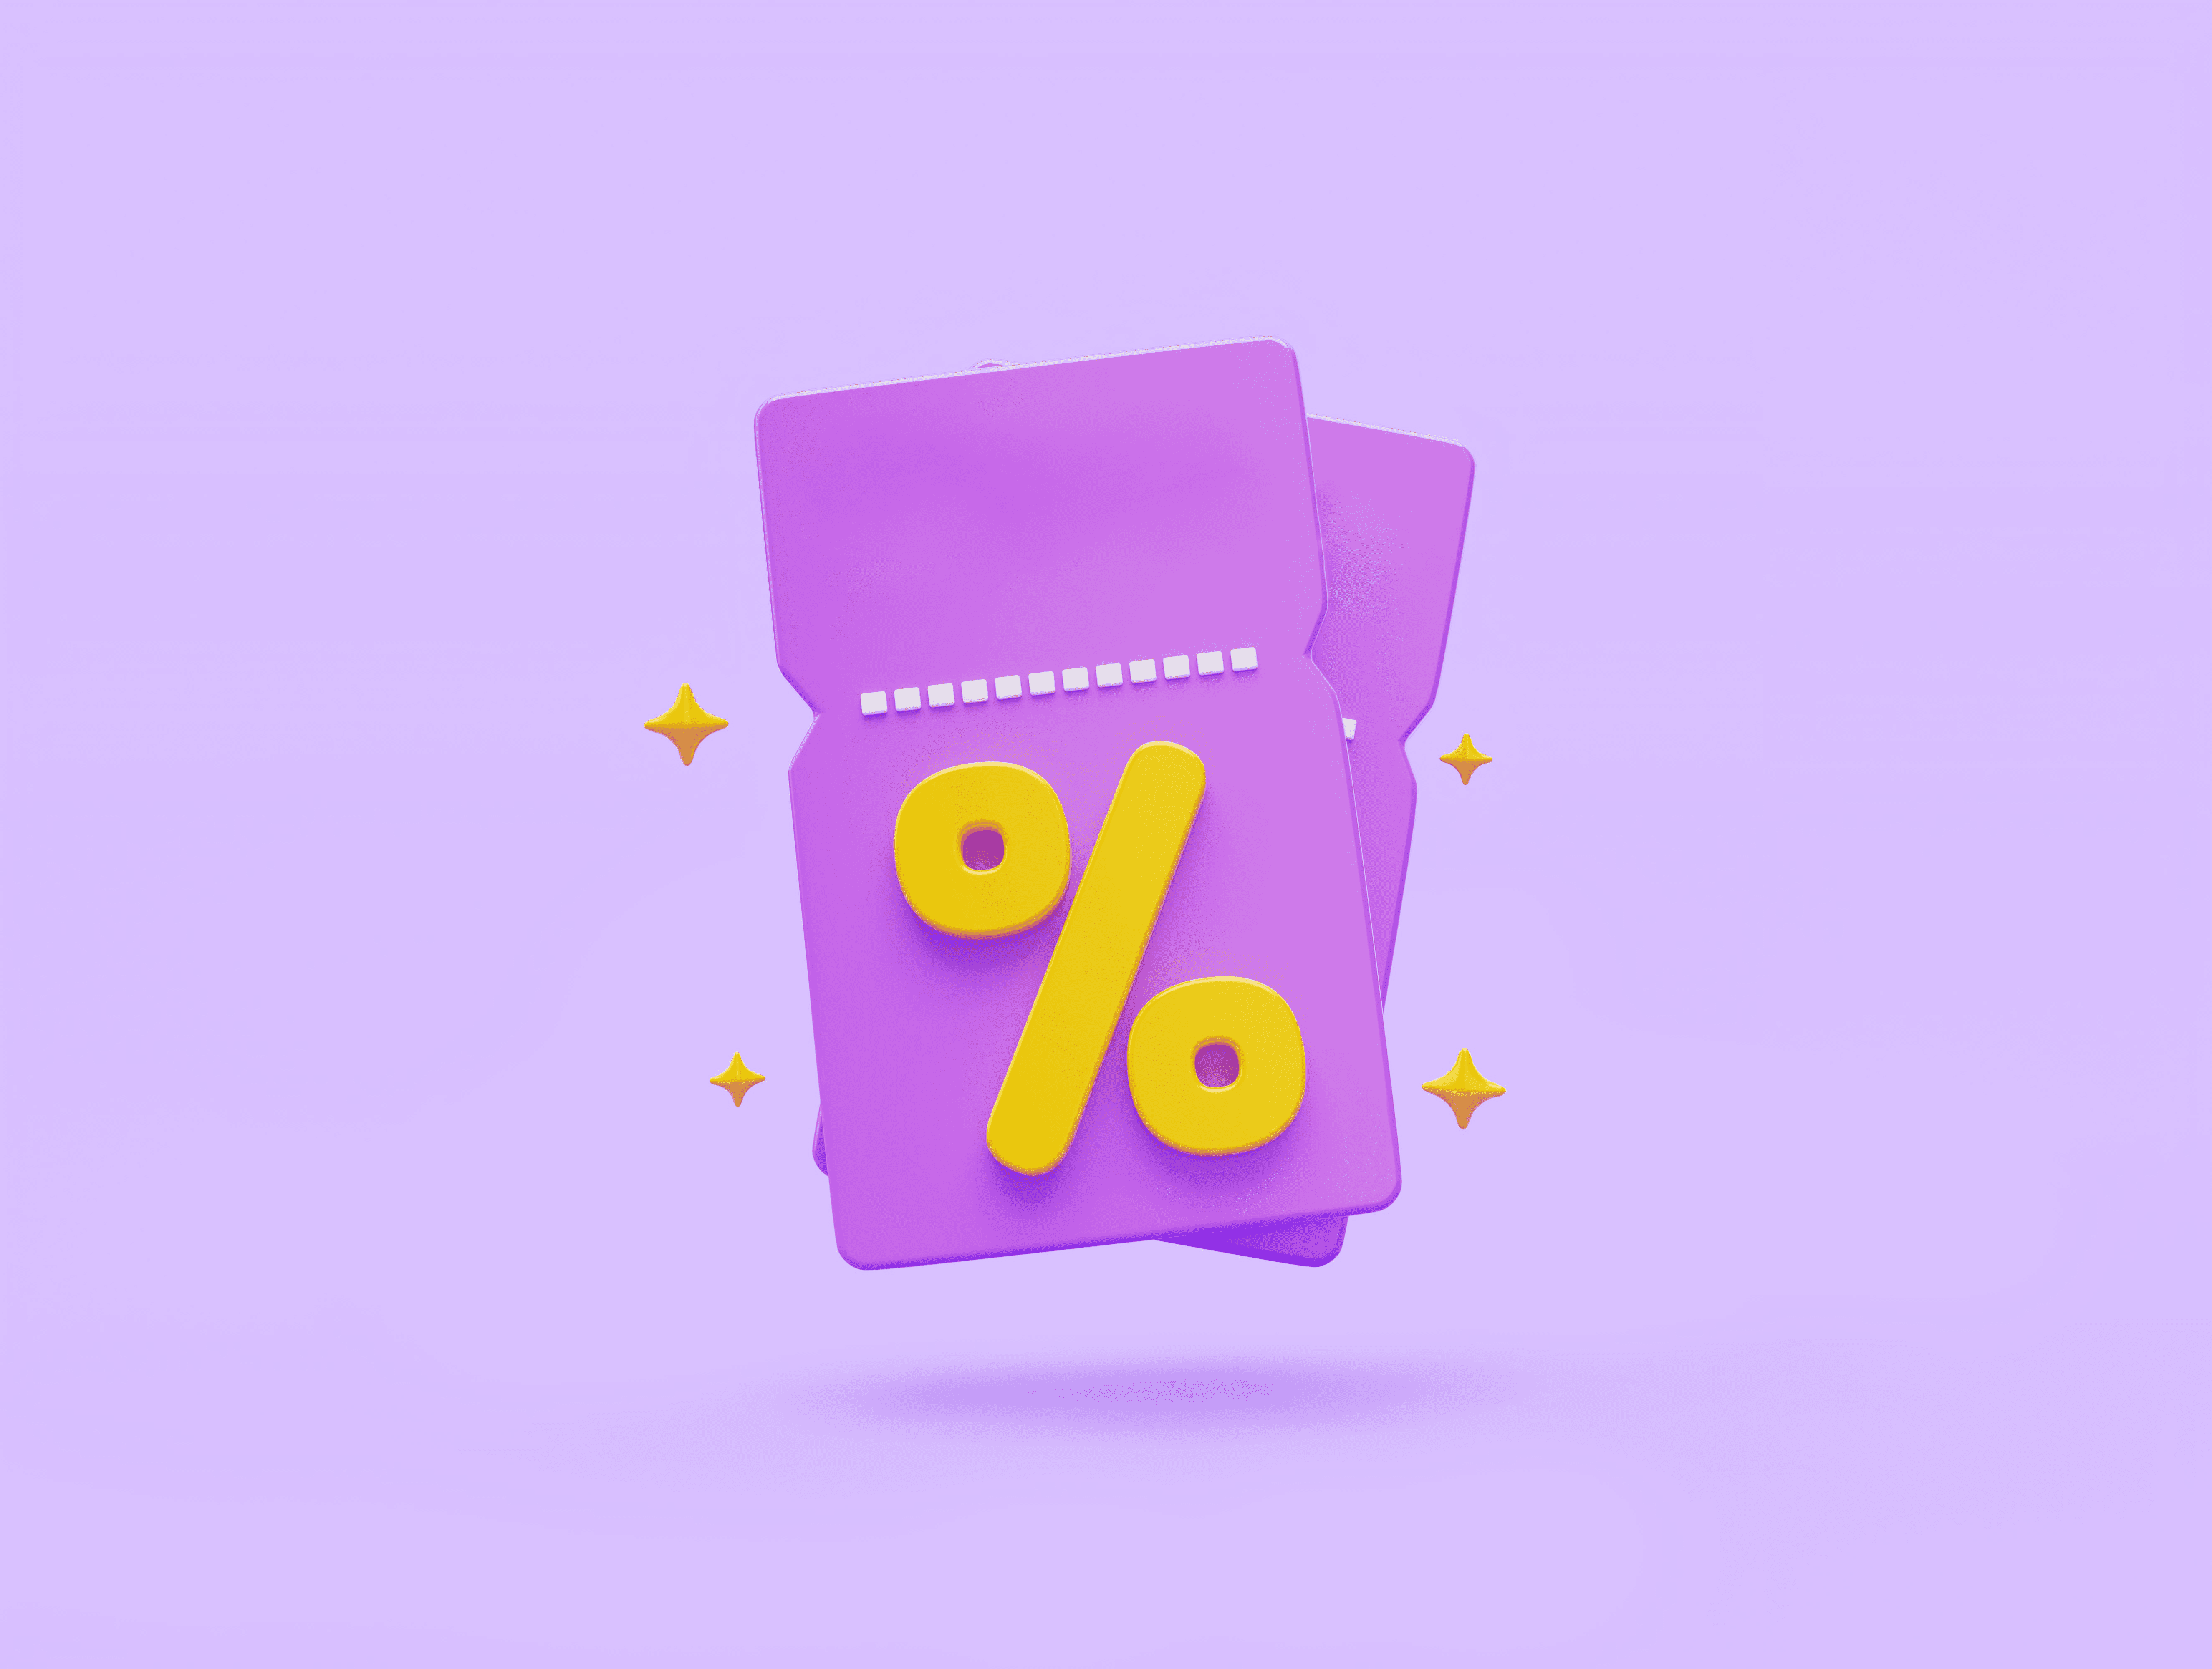 voucher icon sale buy special discount promotion marketing purchase checkout e commerce online shopping 3d illustration32